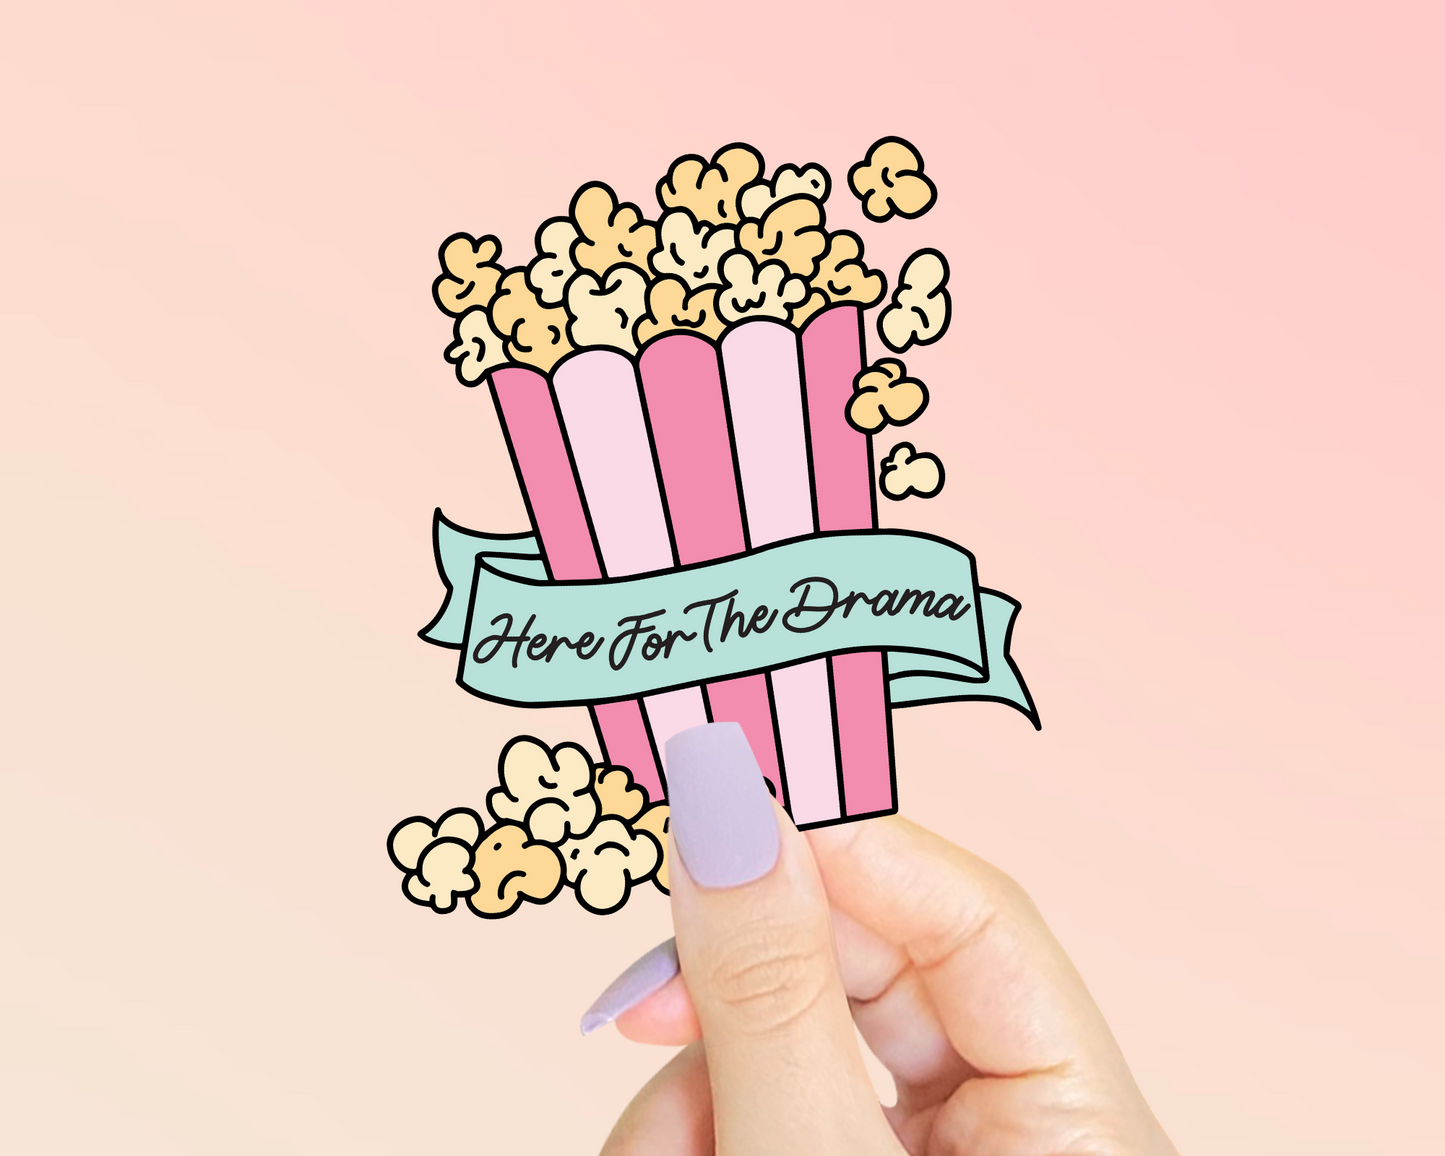 FREE Here For The Drama SVG | Popcorn SVG